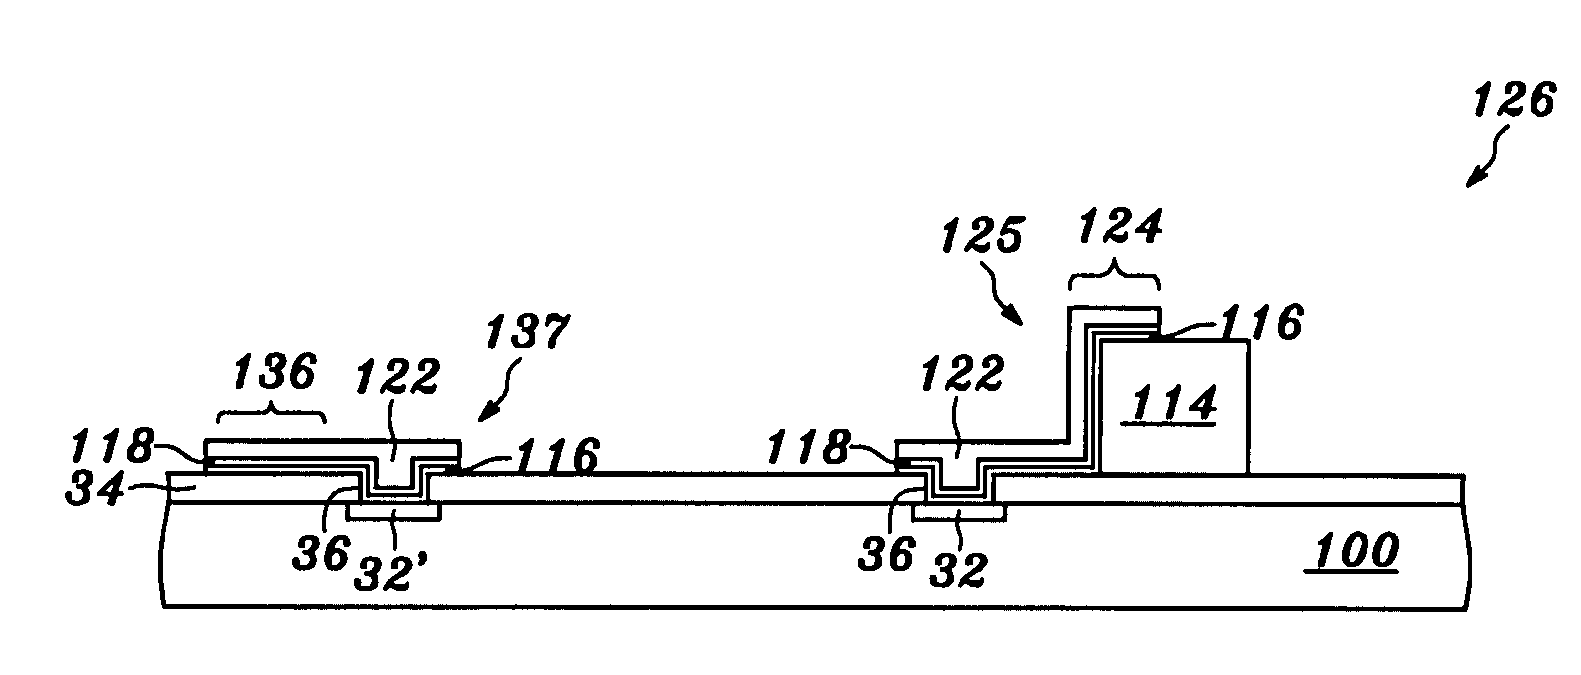 Semiconductor chip and method for fabricating the same